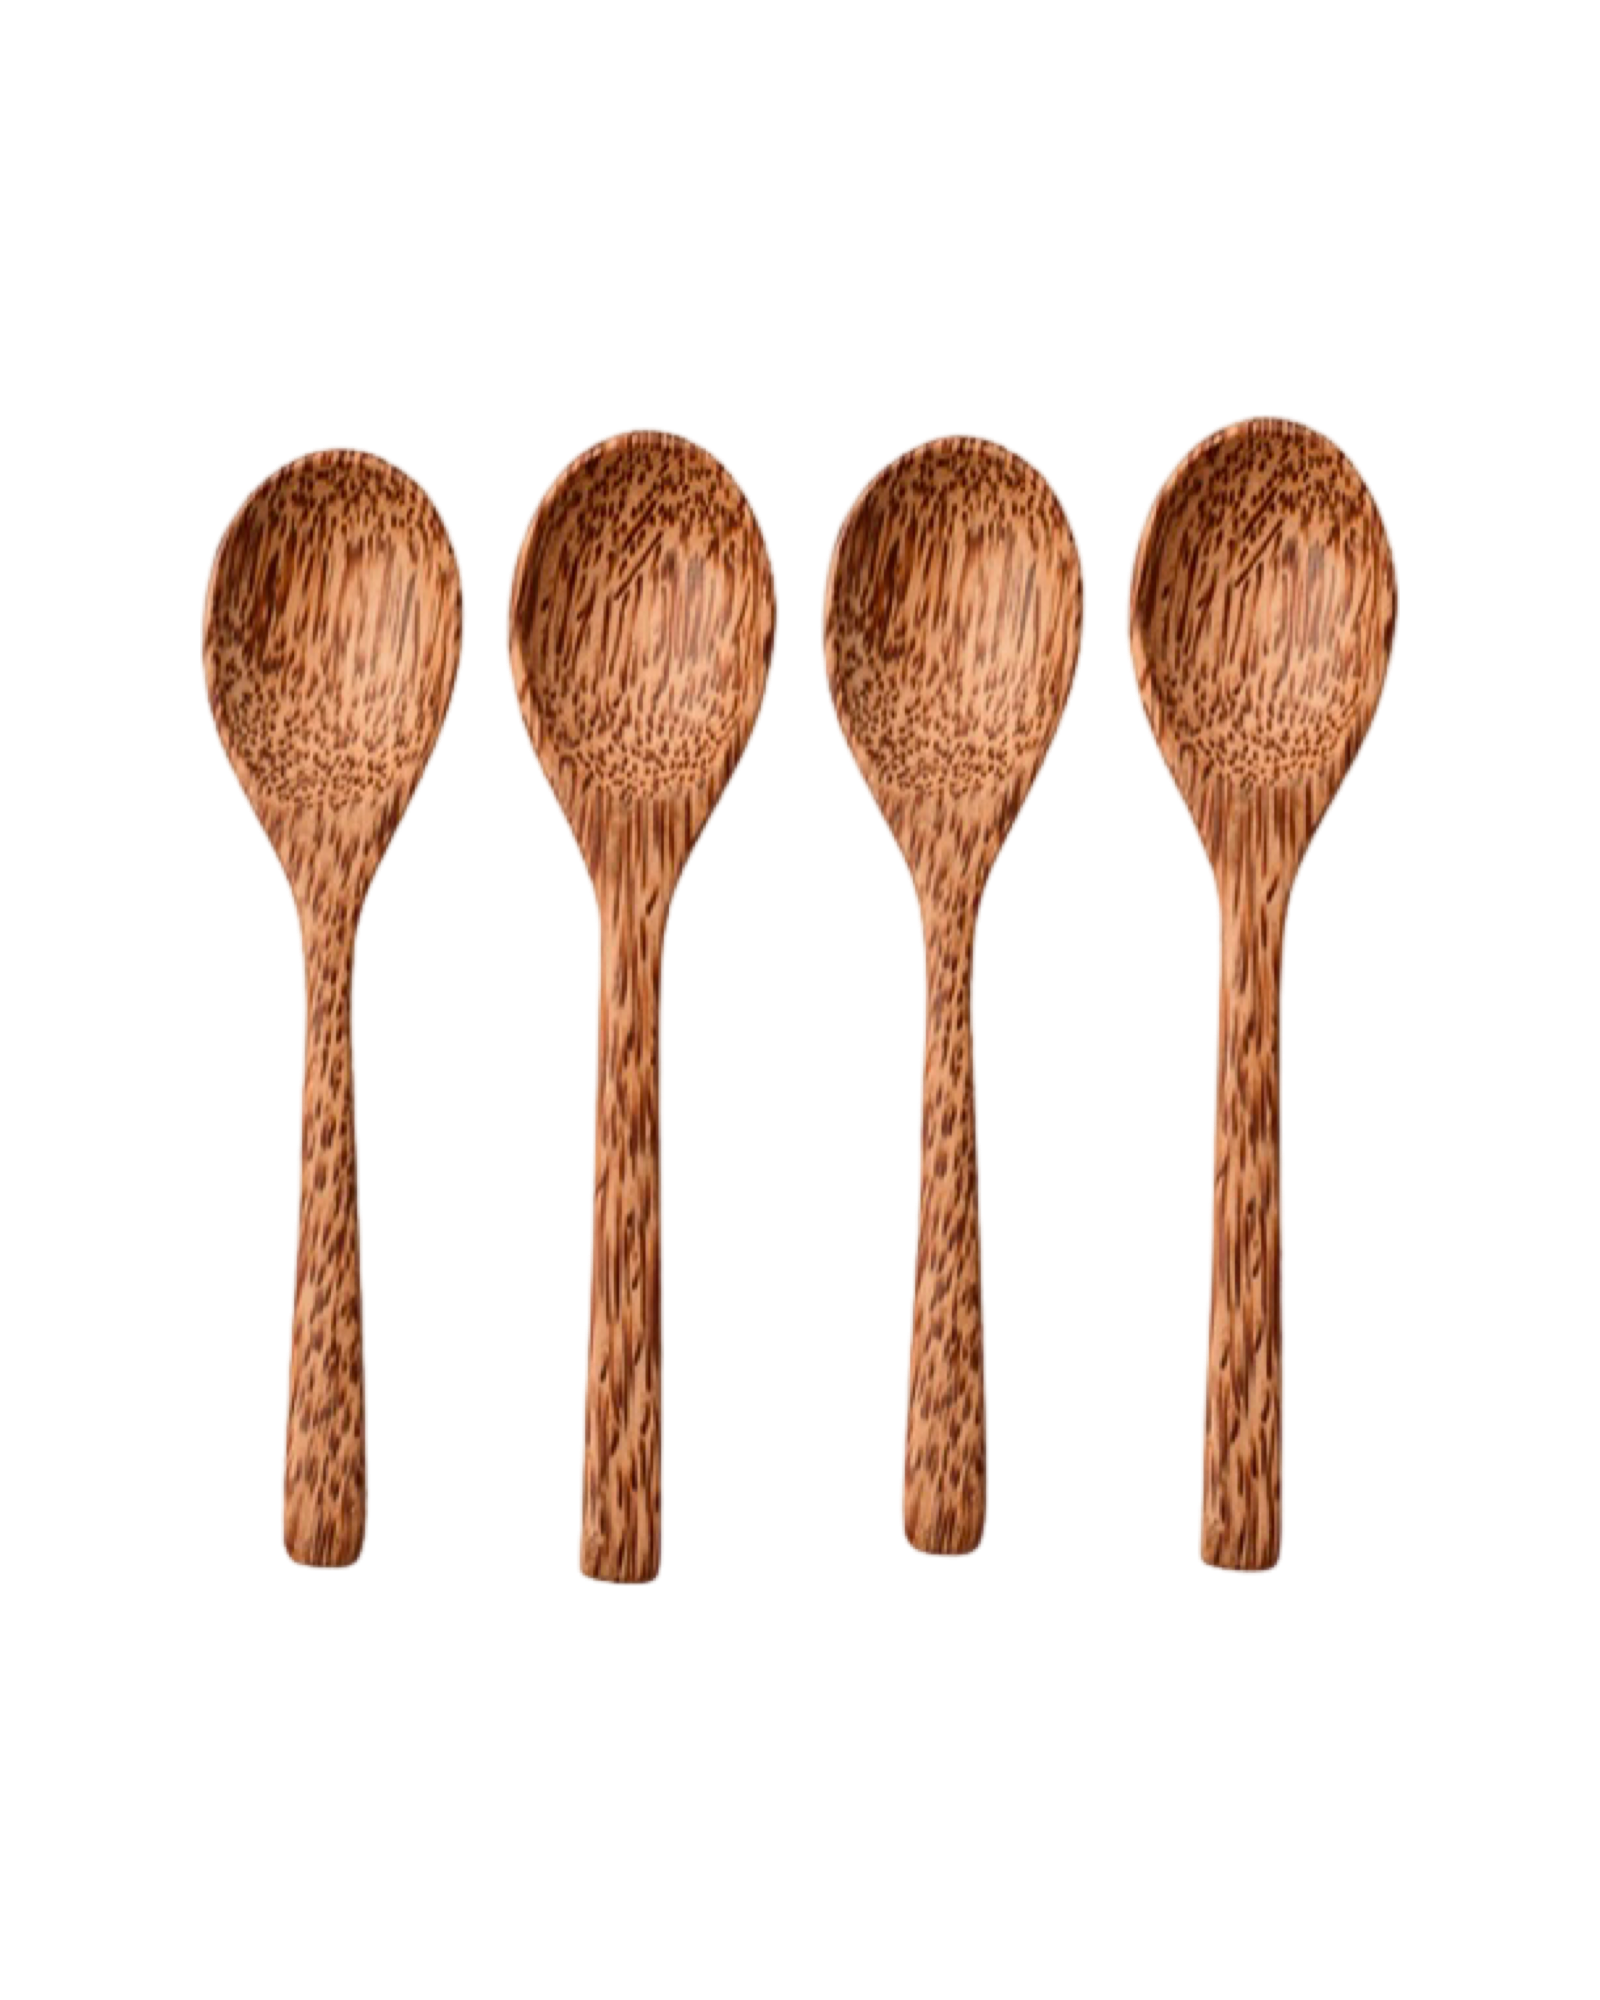 Brown coconut spoons, comes in a set of 4. 